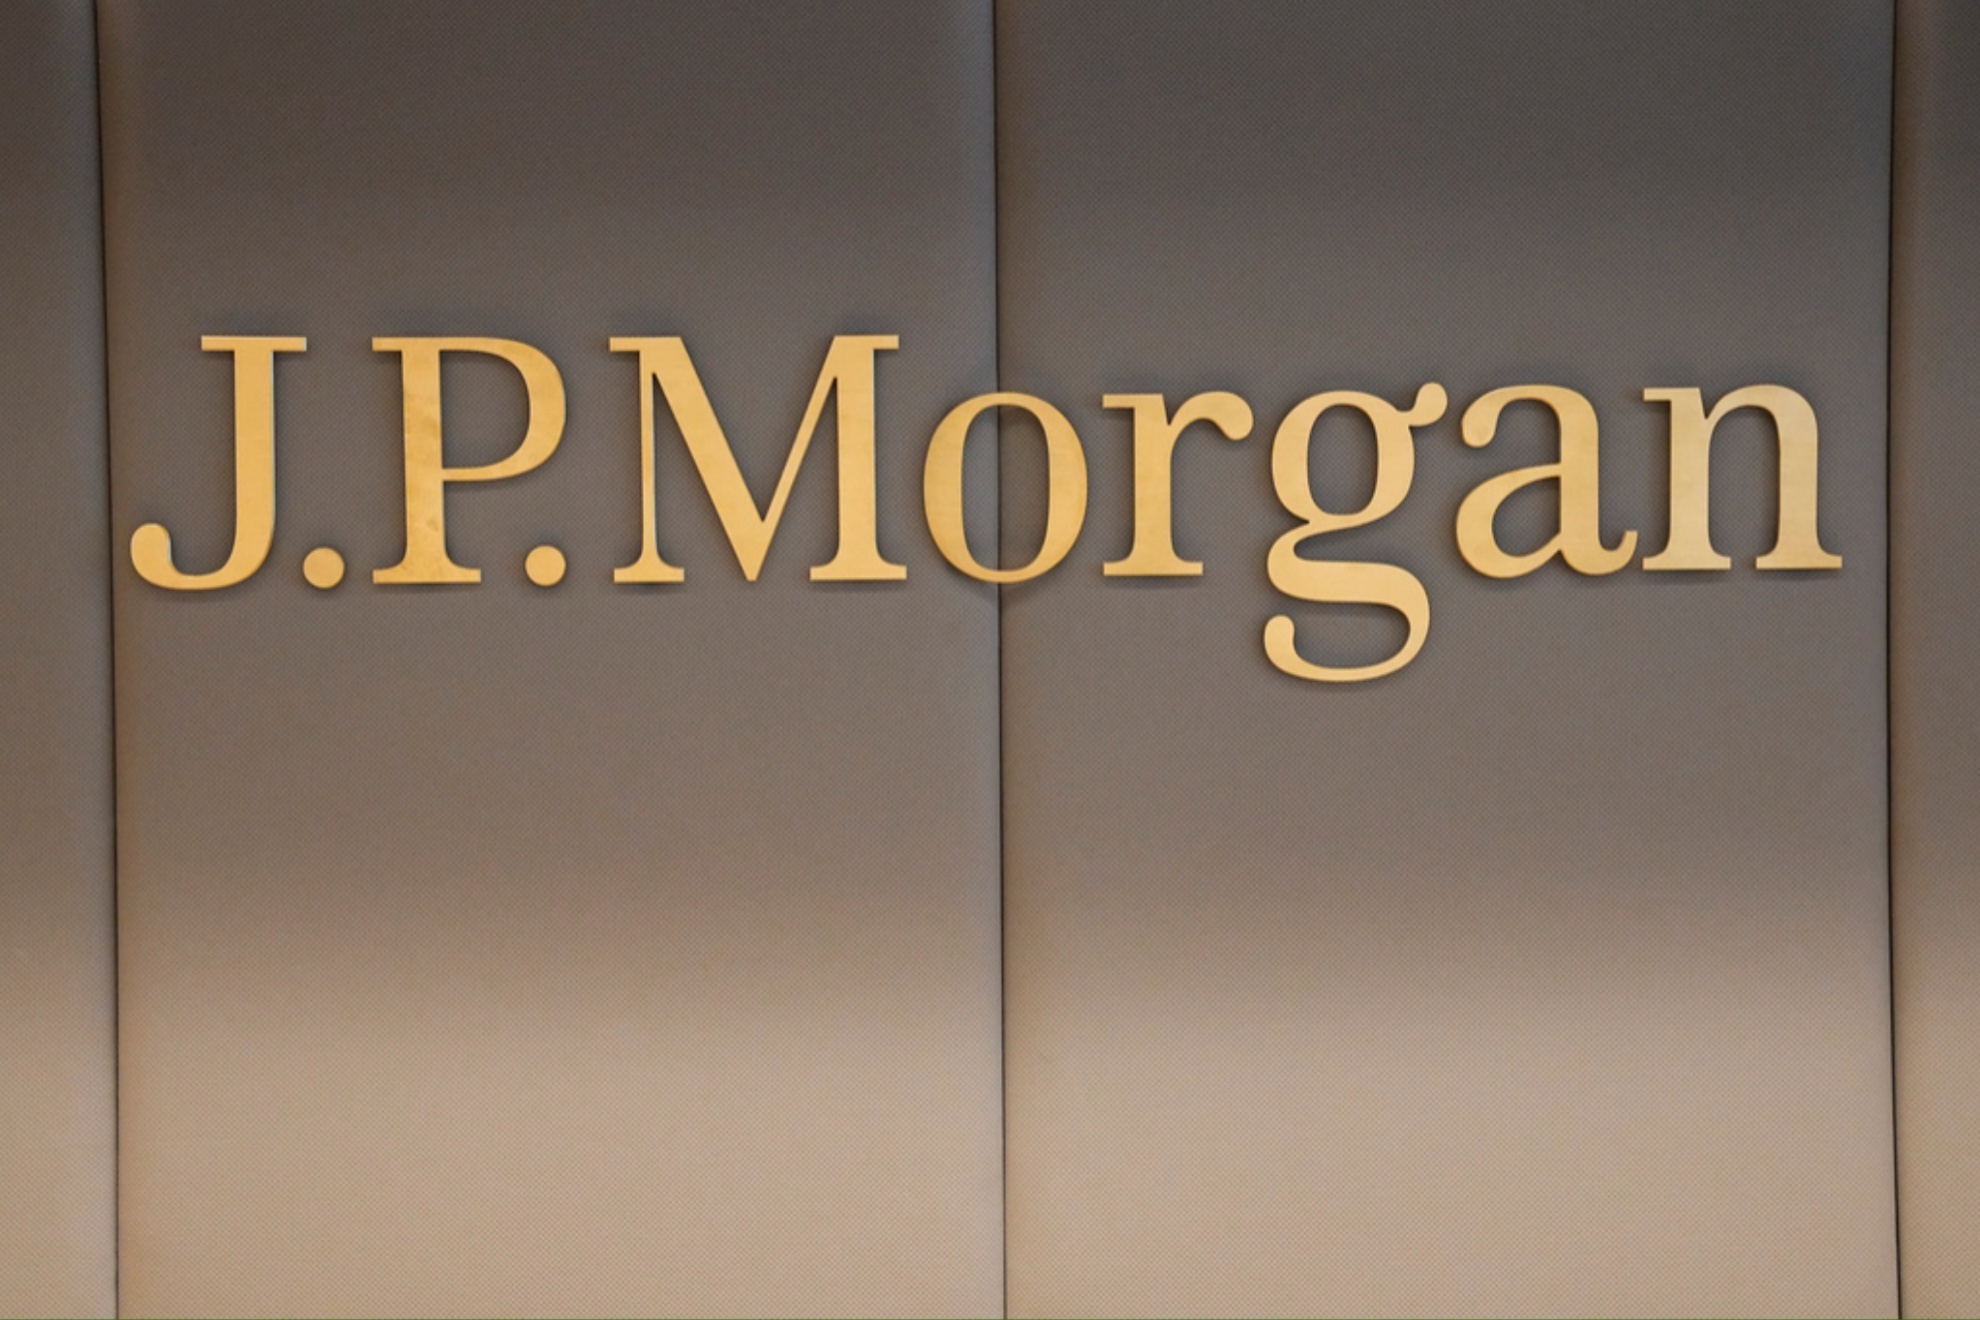 J.P. Morgan settled an Epstein lawsuit with a $75 million payout